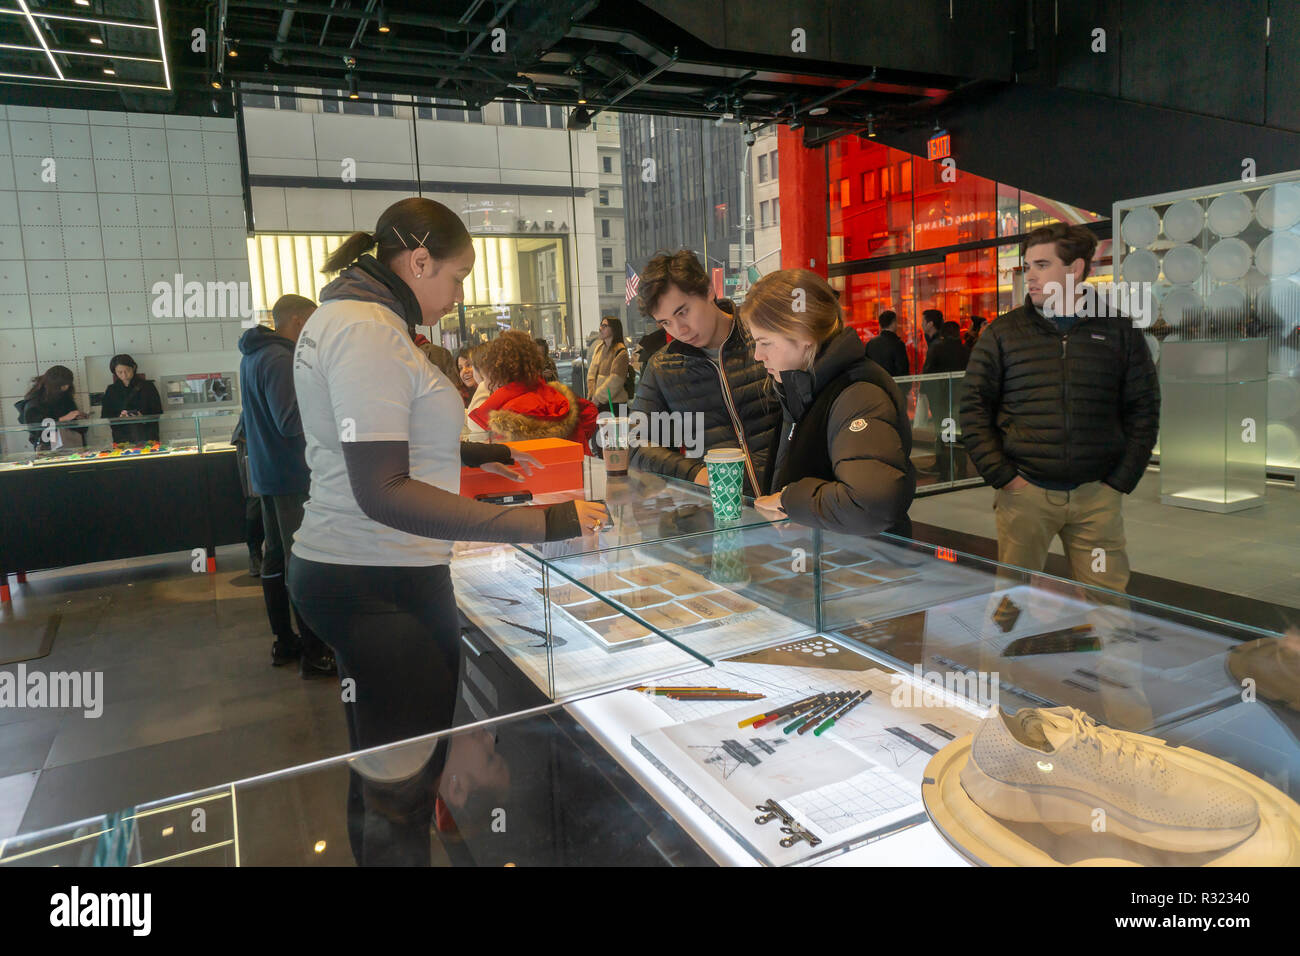 Customization options are discussed at the counter in the newly opened Nike  flagship store on Fifth avenue in New York on Saturday, November 17, 2018.  The 69,000 square foot store, dubbed the 